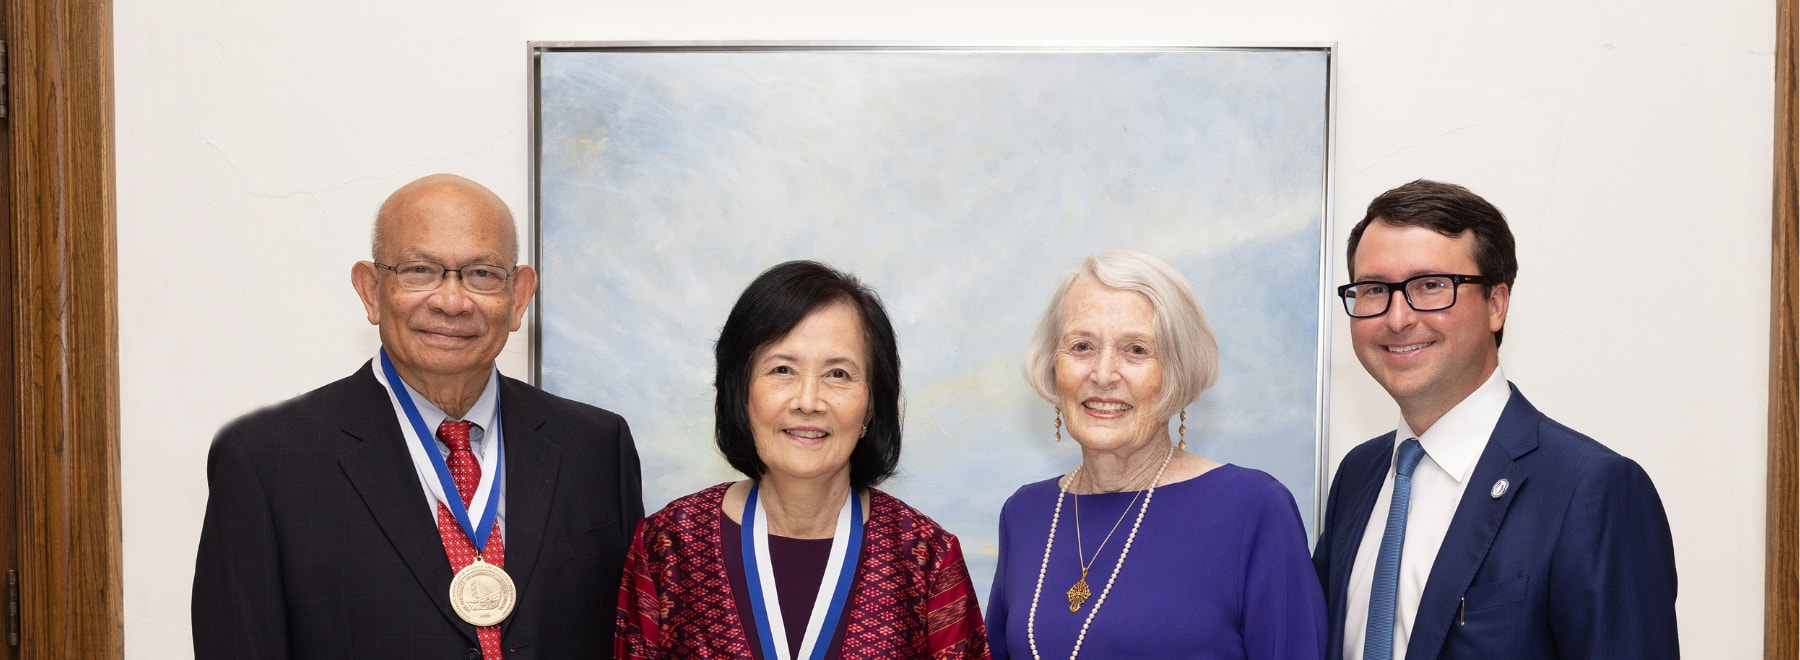 From left, Dr. Somprasong Songcharoen, Dr. Suthin Songcharoen, Mary Jabaley and Dr. Marc Walker celebrate the creation of the Jabaley-Songcharoen Center for Hand, Upper Extremity and Nerve Surgery.